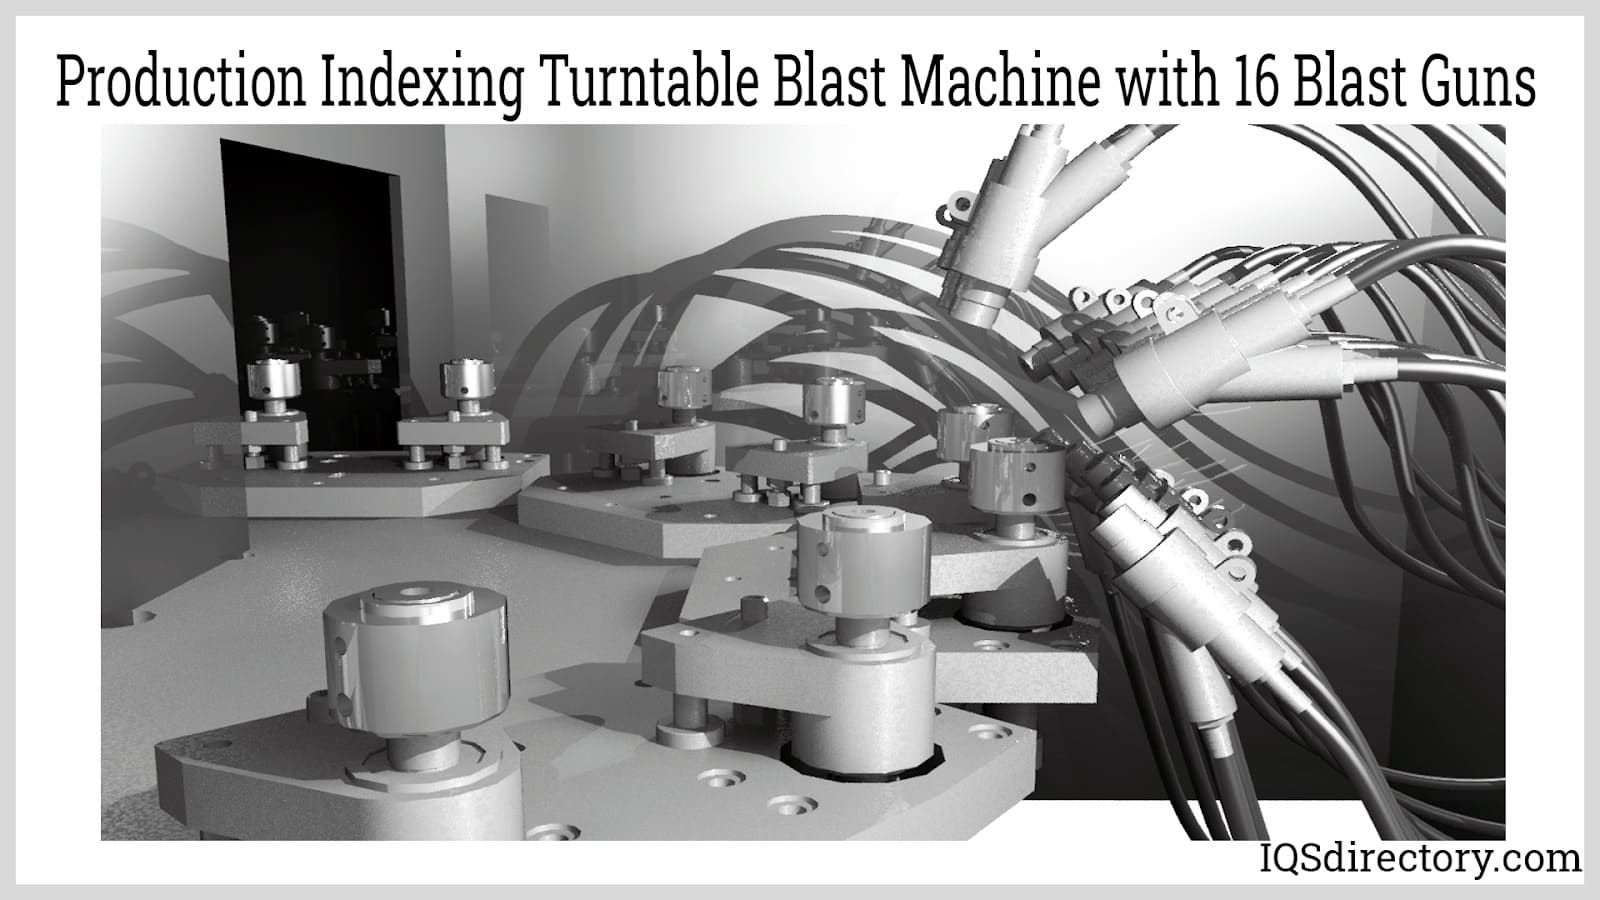 Production Indexing Turntable Blast Machine with 16 Blast Guns